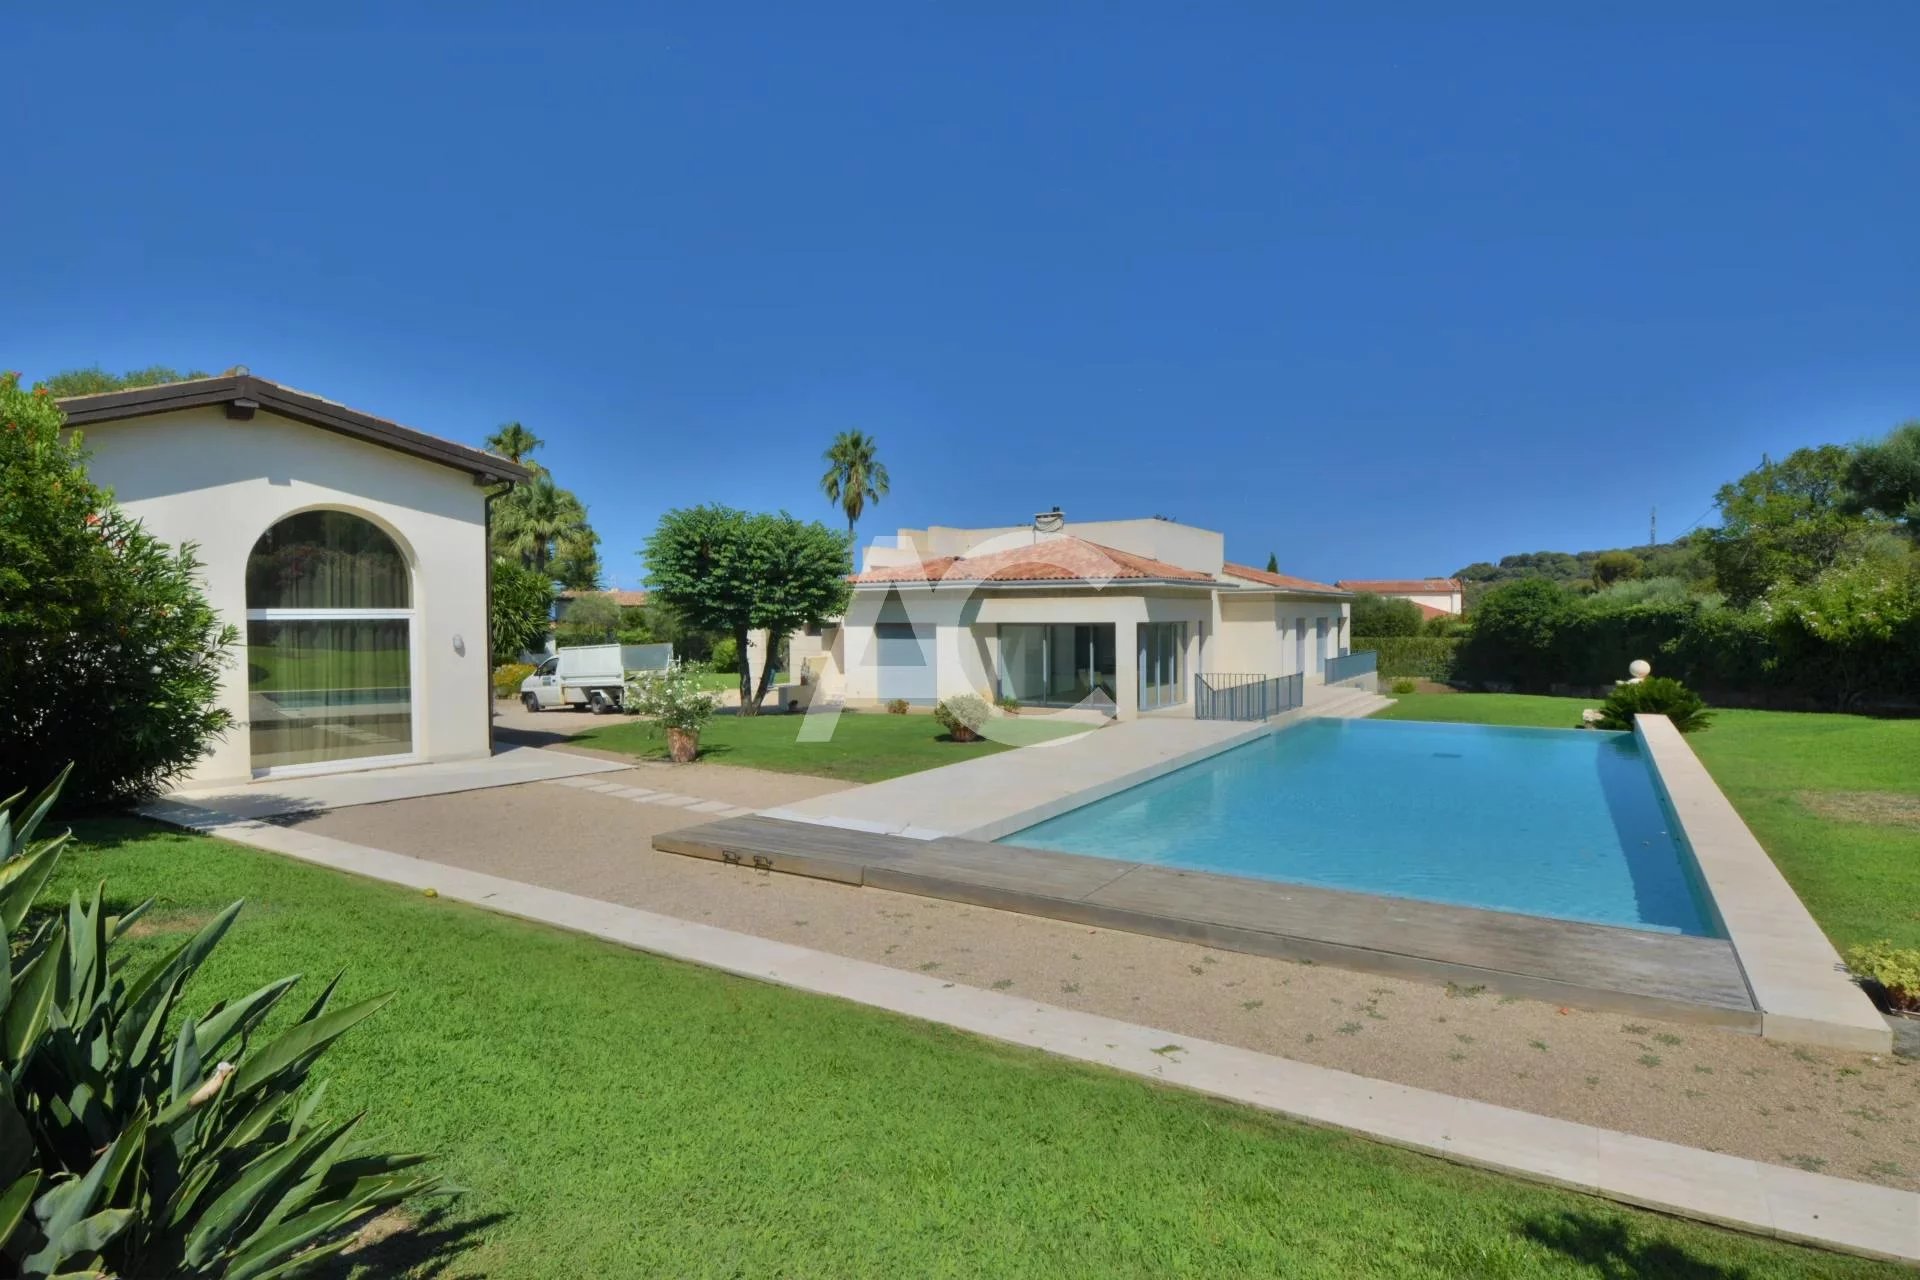 CAP D'ANTIBES - EXCEPTIONAL VILLA WITH 4100m² OF LAND PLOT